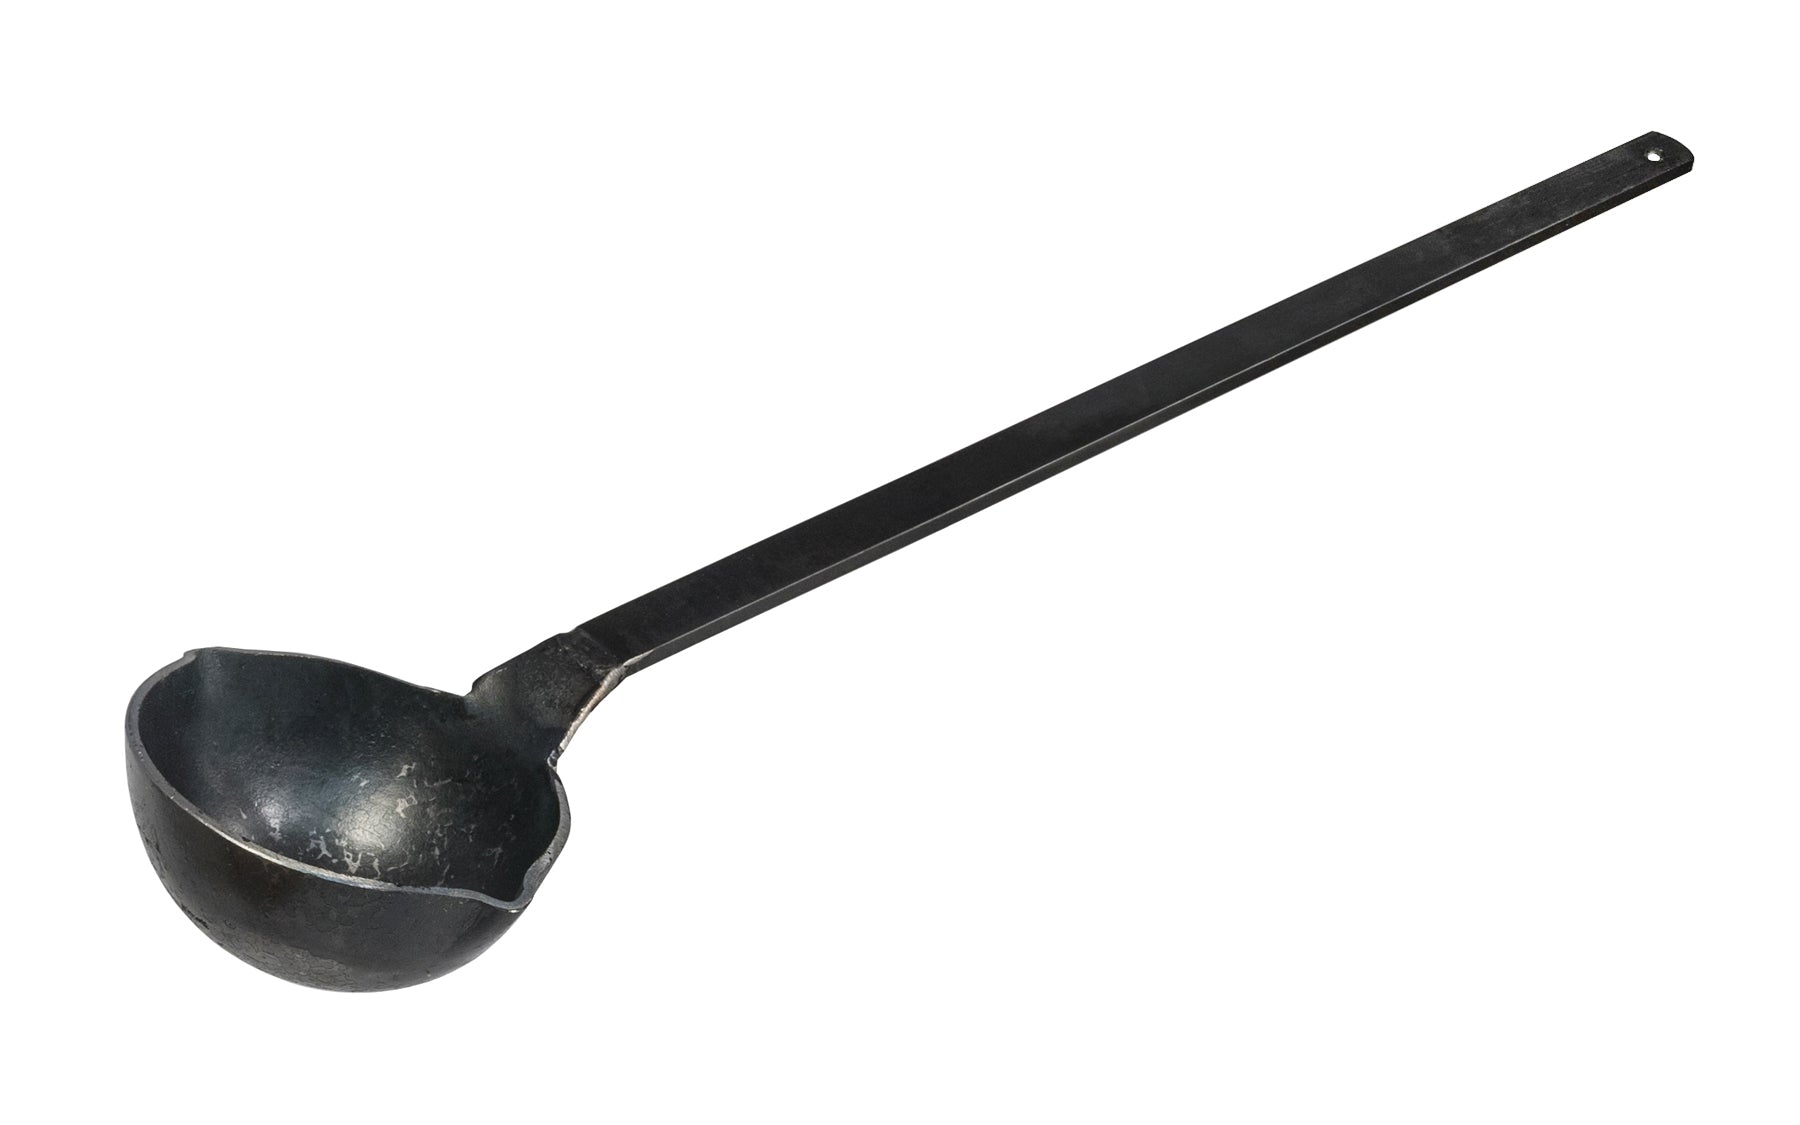 C.S. Osborne Pouring Ladle is great for iron, lead, aluminum, even bronze & beryllium. The bowl is made of forged steel. Model 373 ~ Made in the USA. 